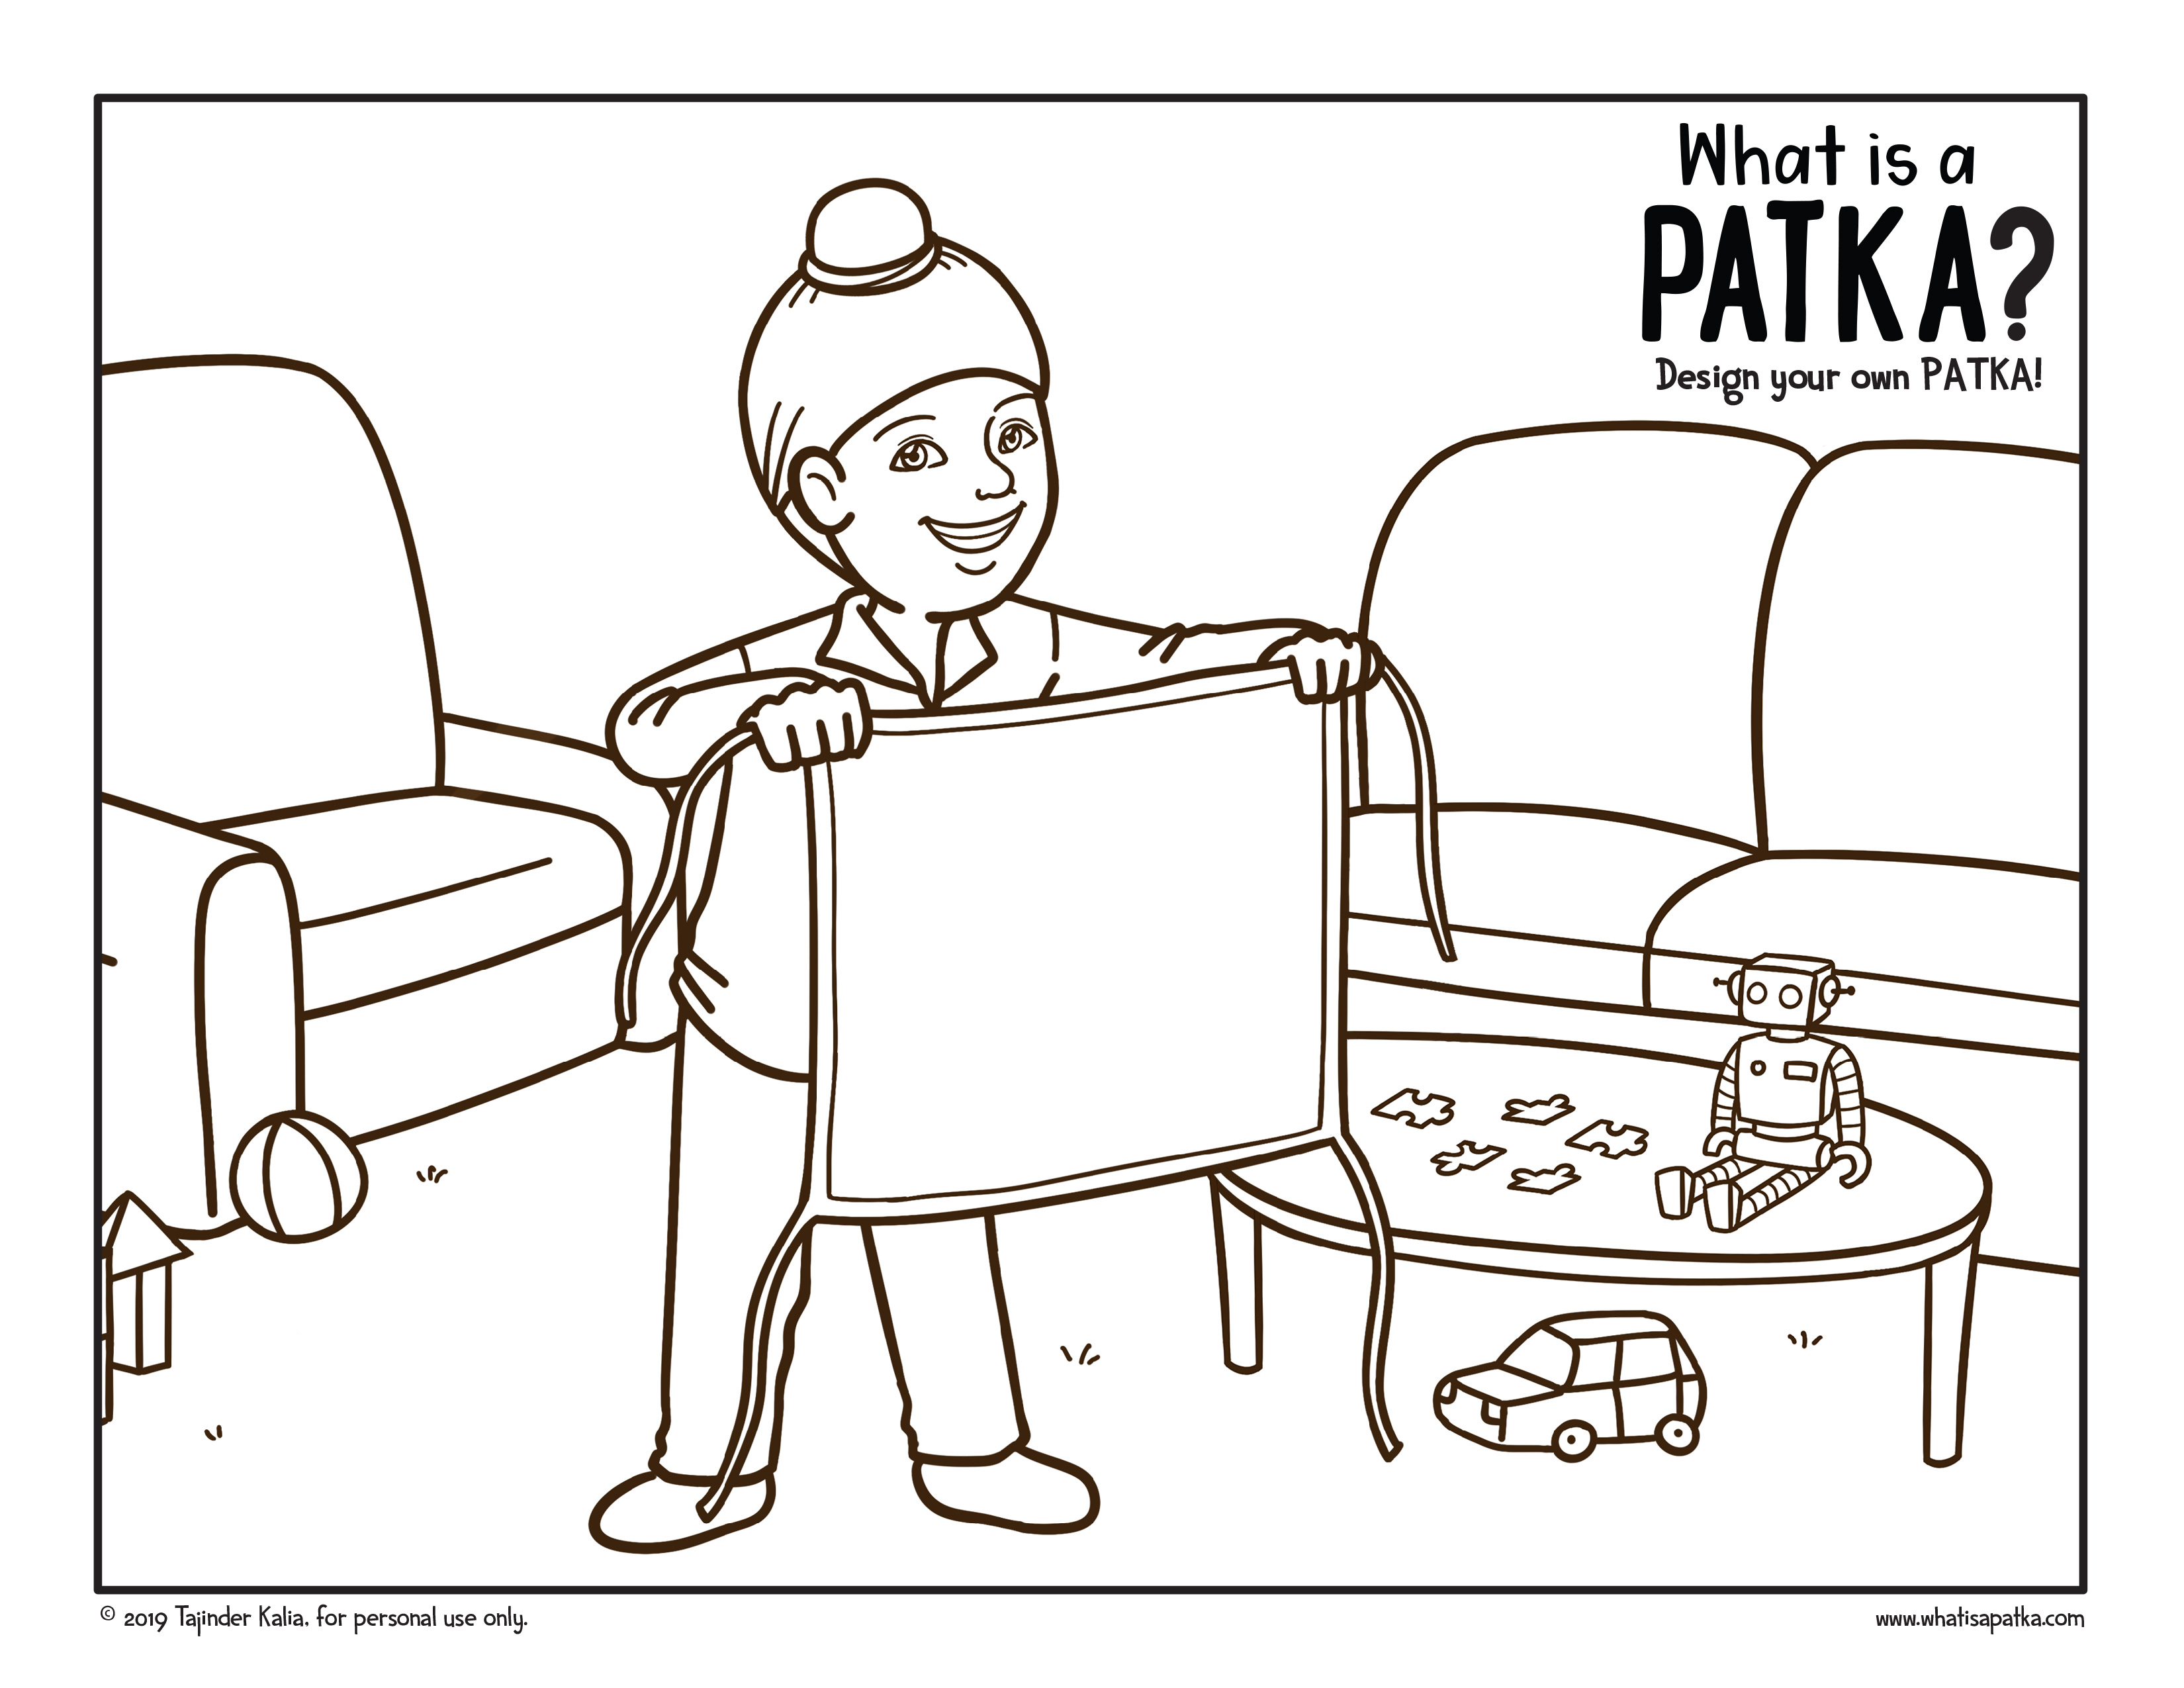 Download a coloring sheet